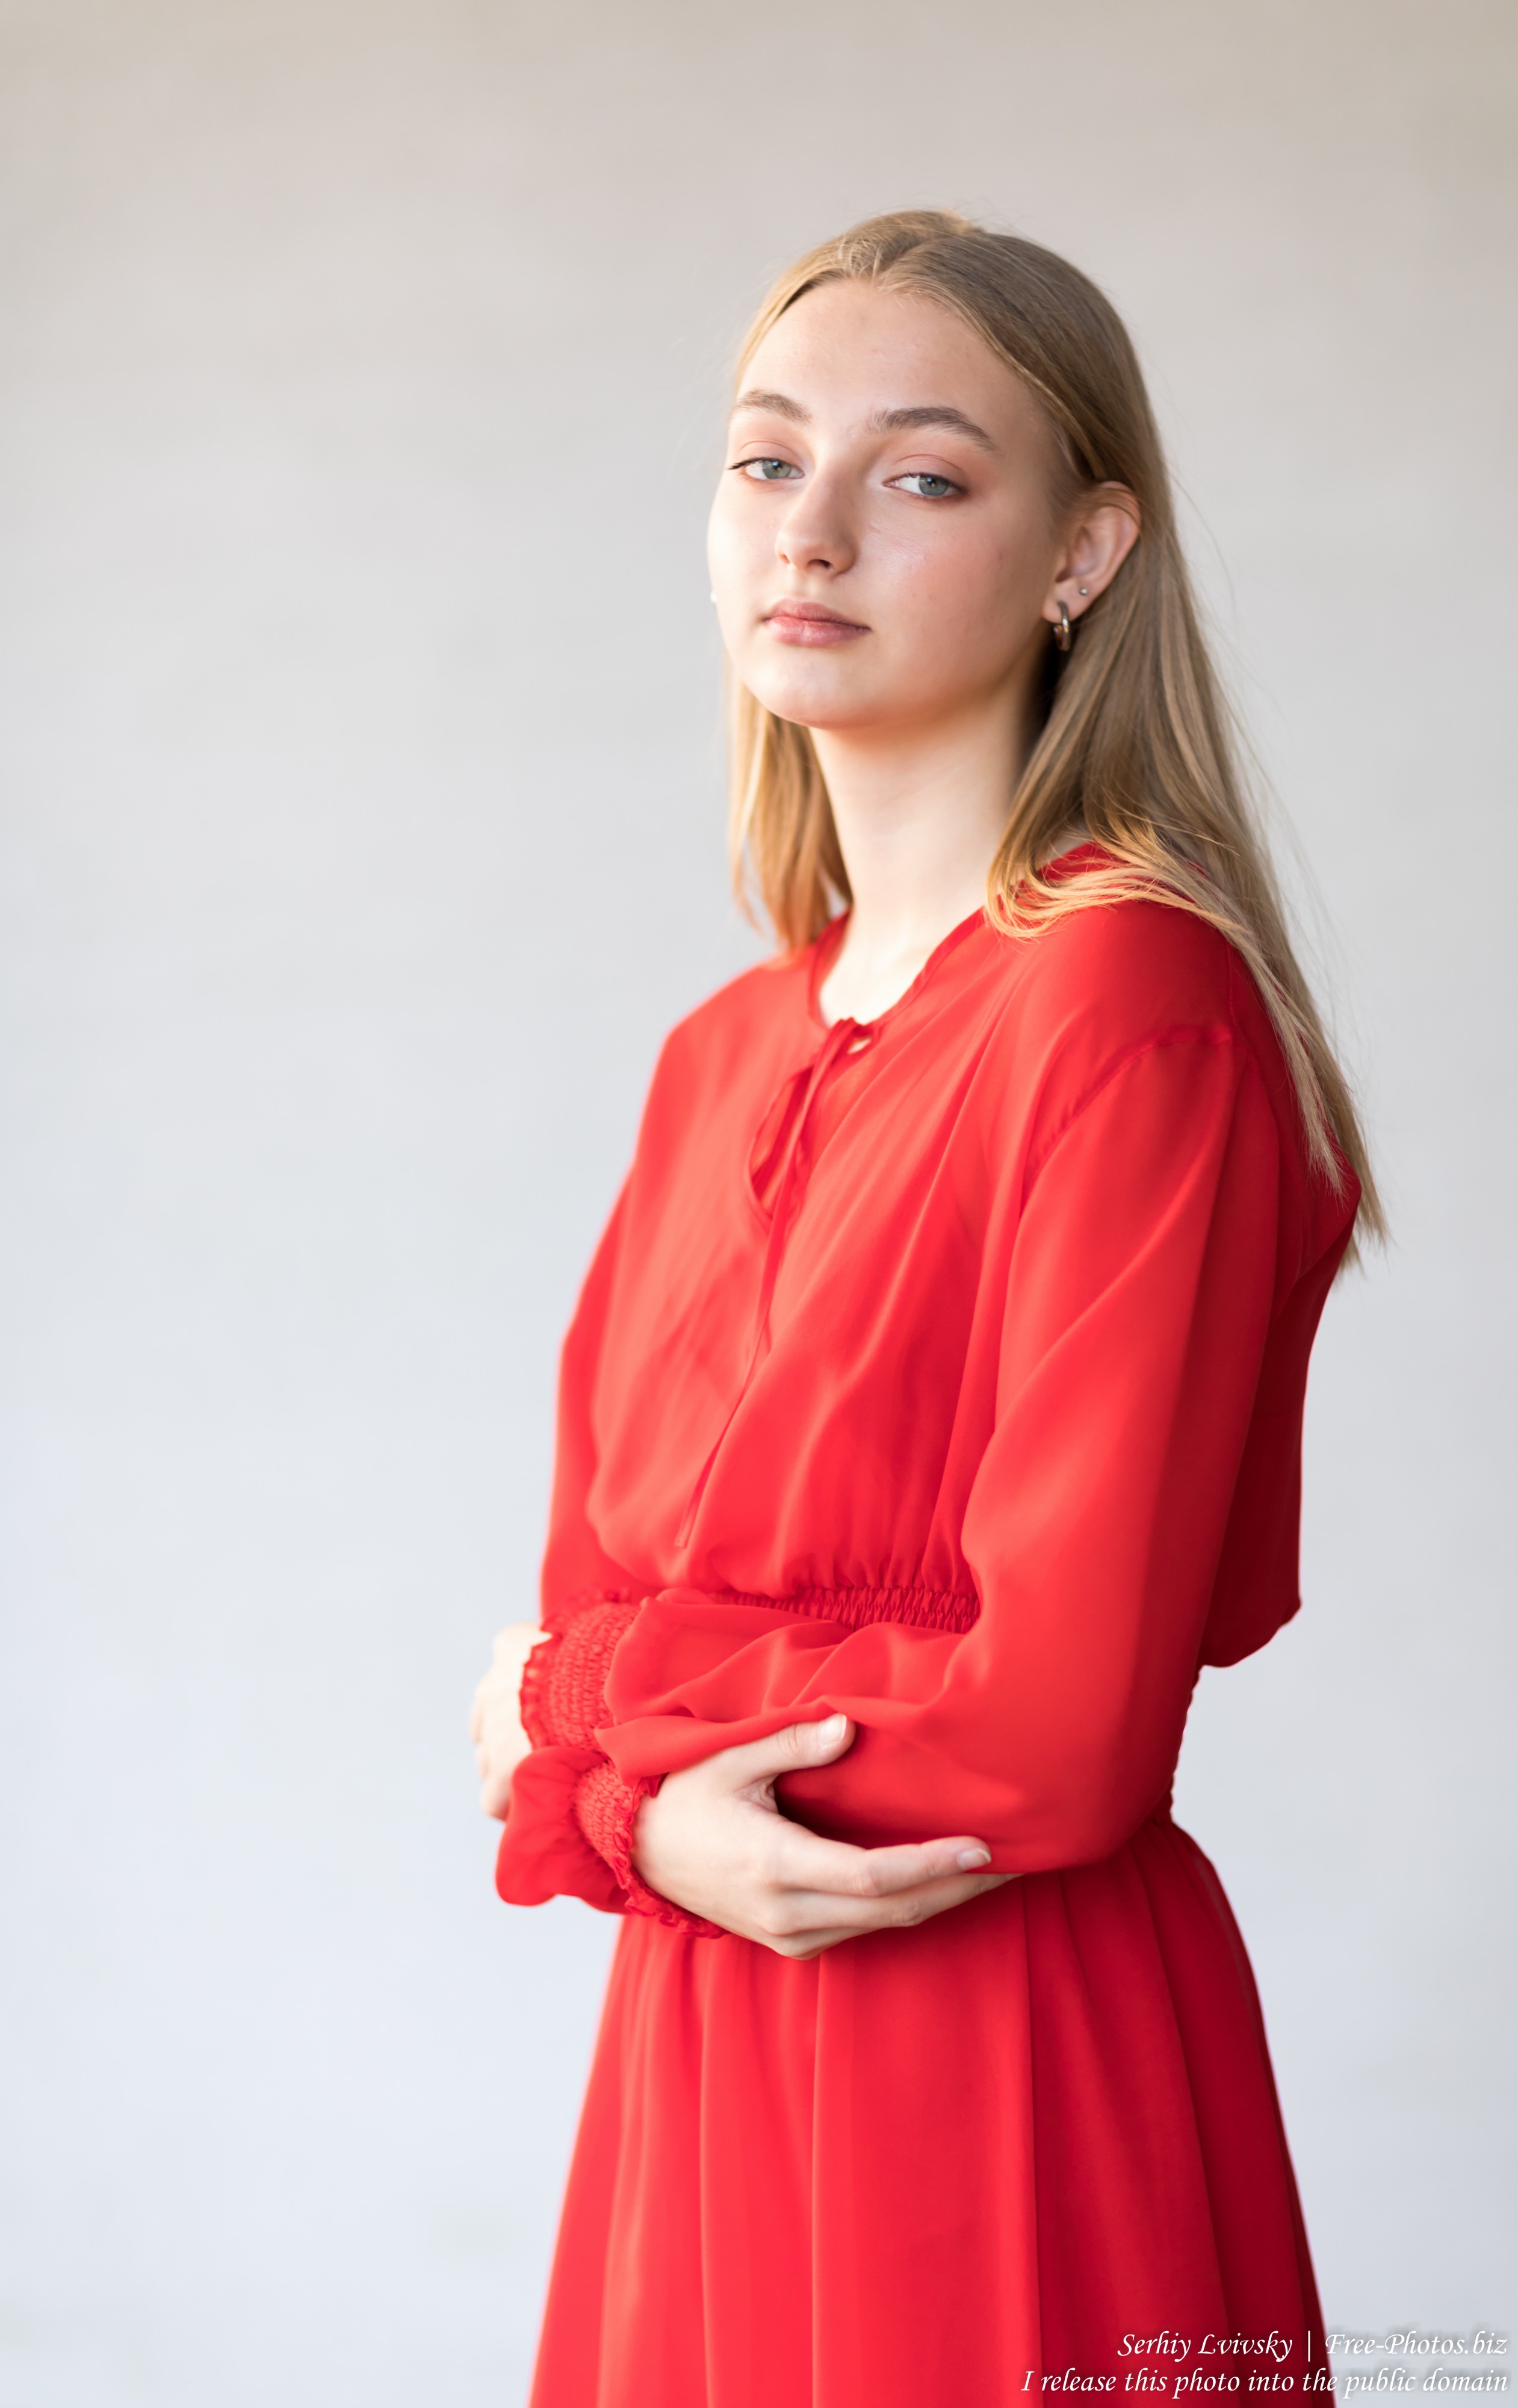 Nastia - a 16-year-old natural blonde girl photographed in September 2019 by Serhiy Lvivsky, picture 6